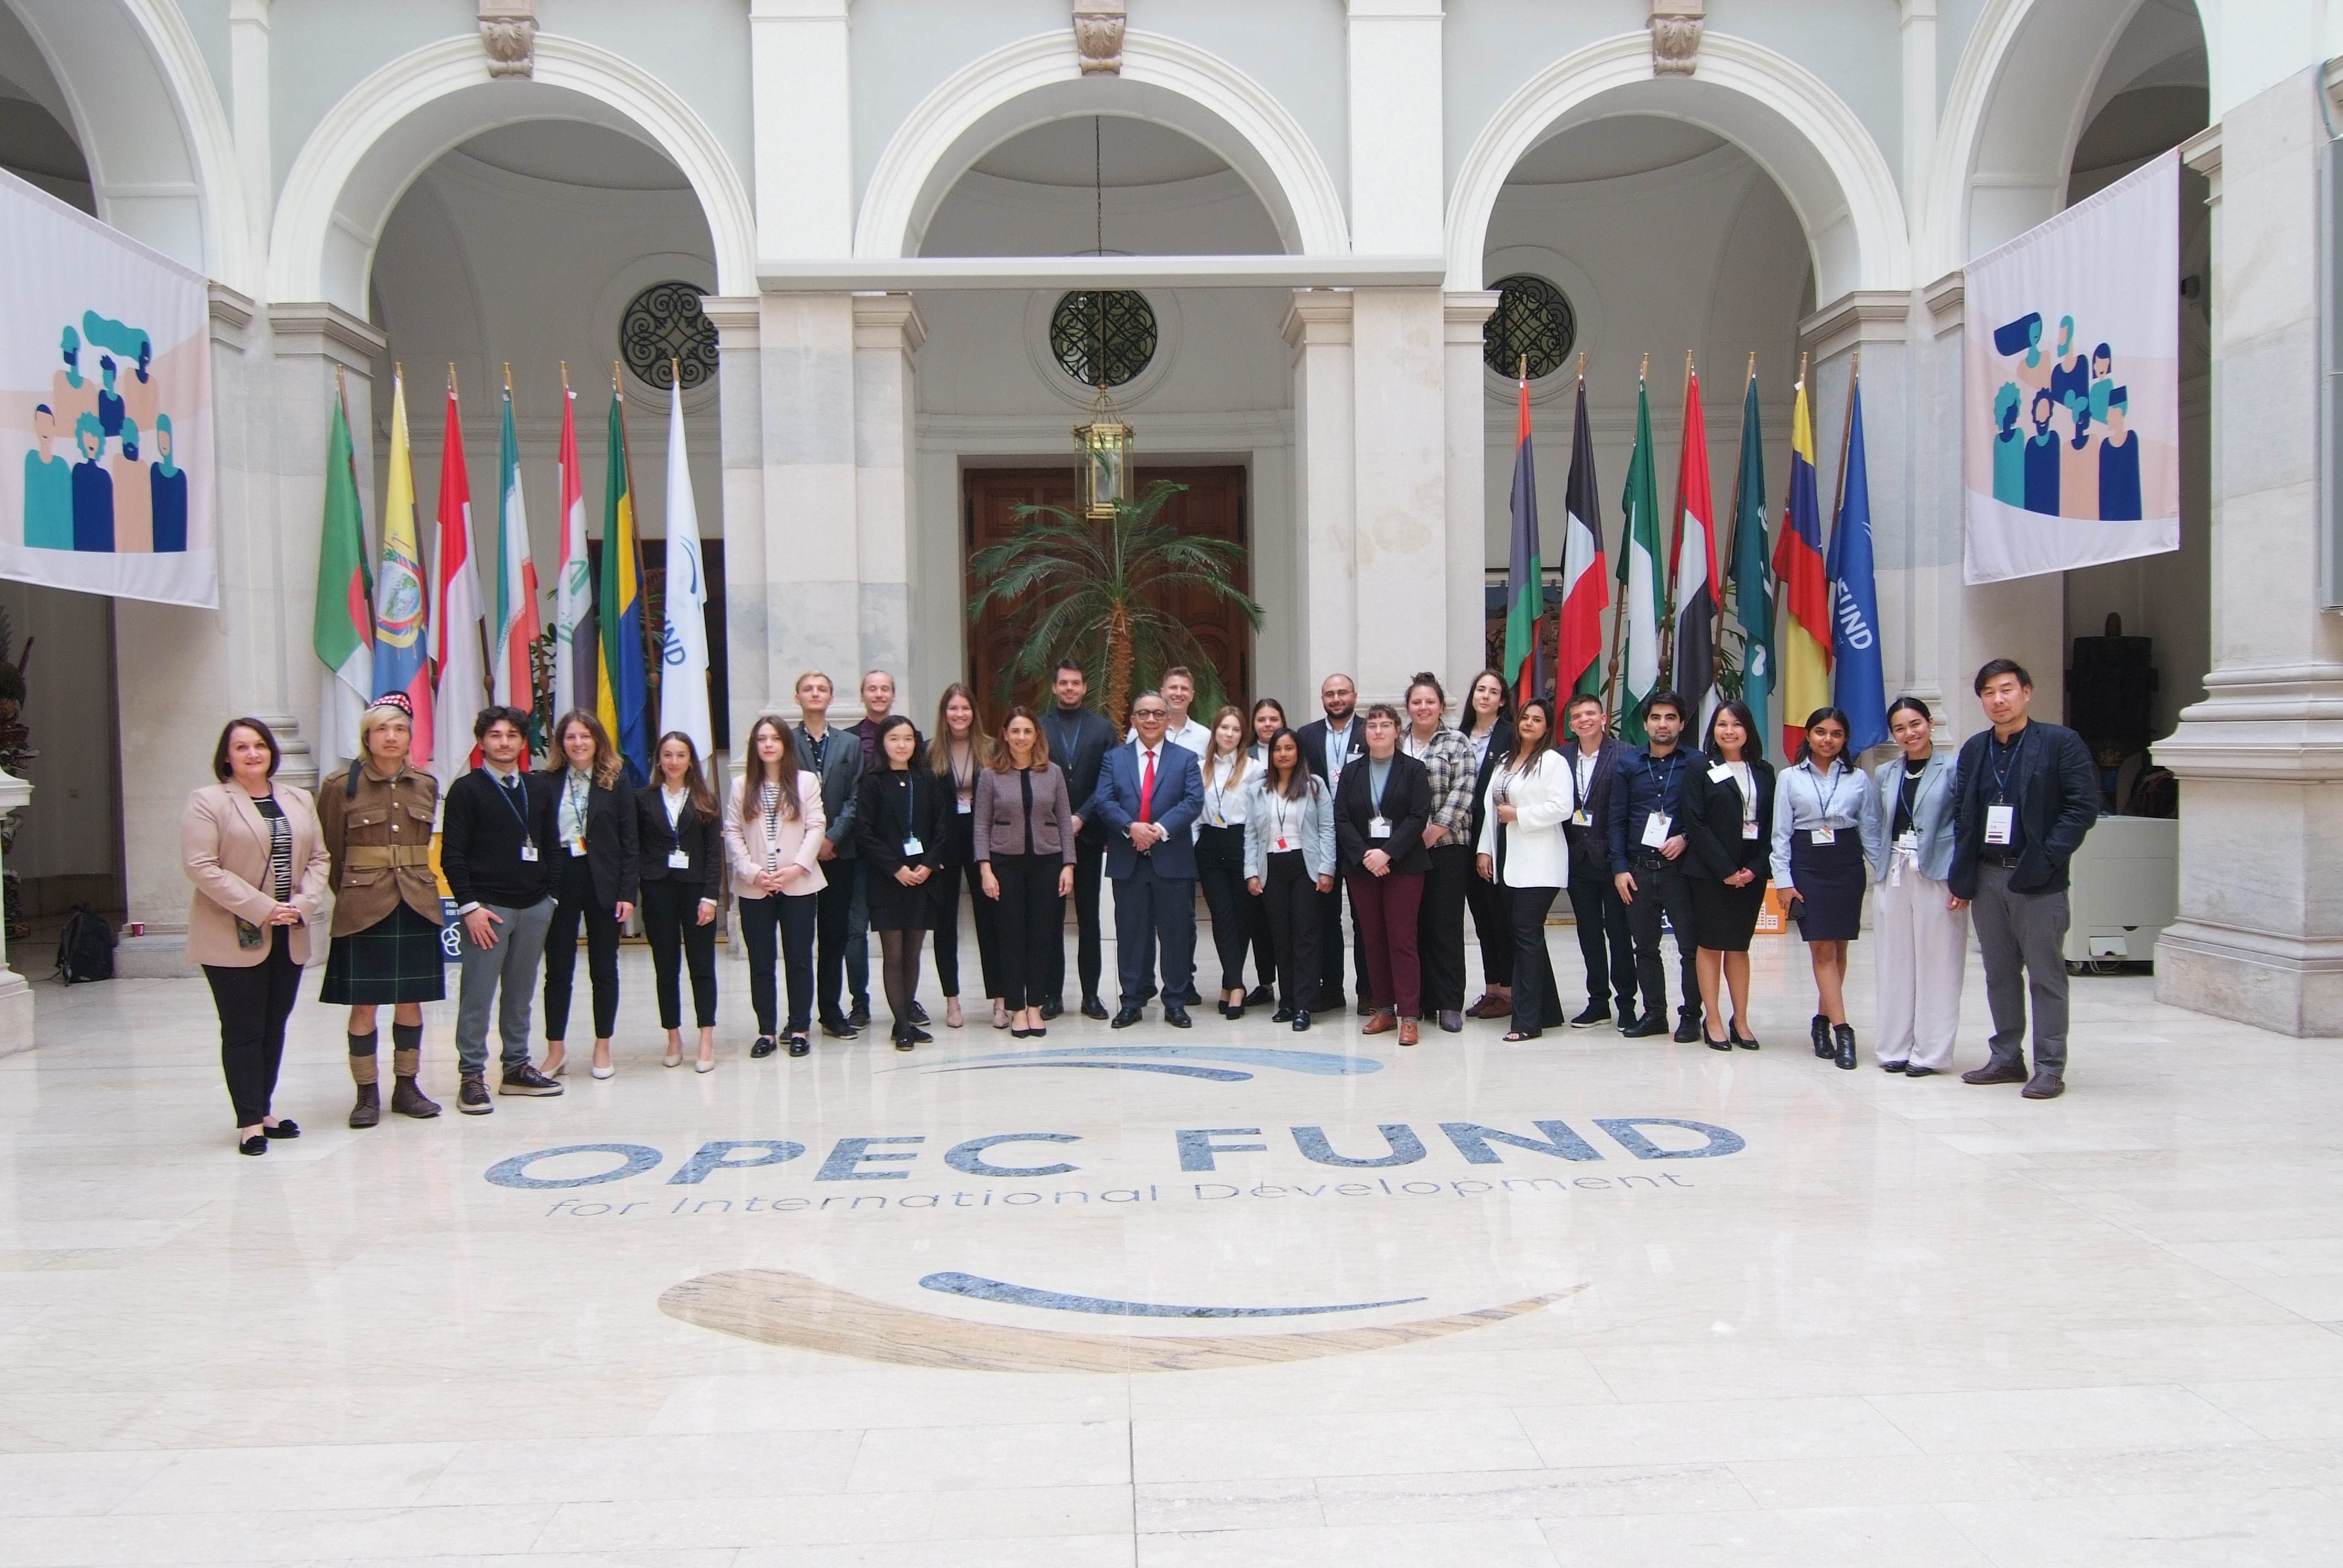 Photo in the main hall of the OPEC Fund for International Development